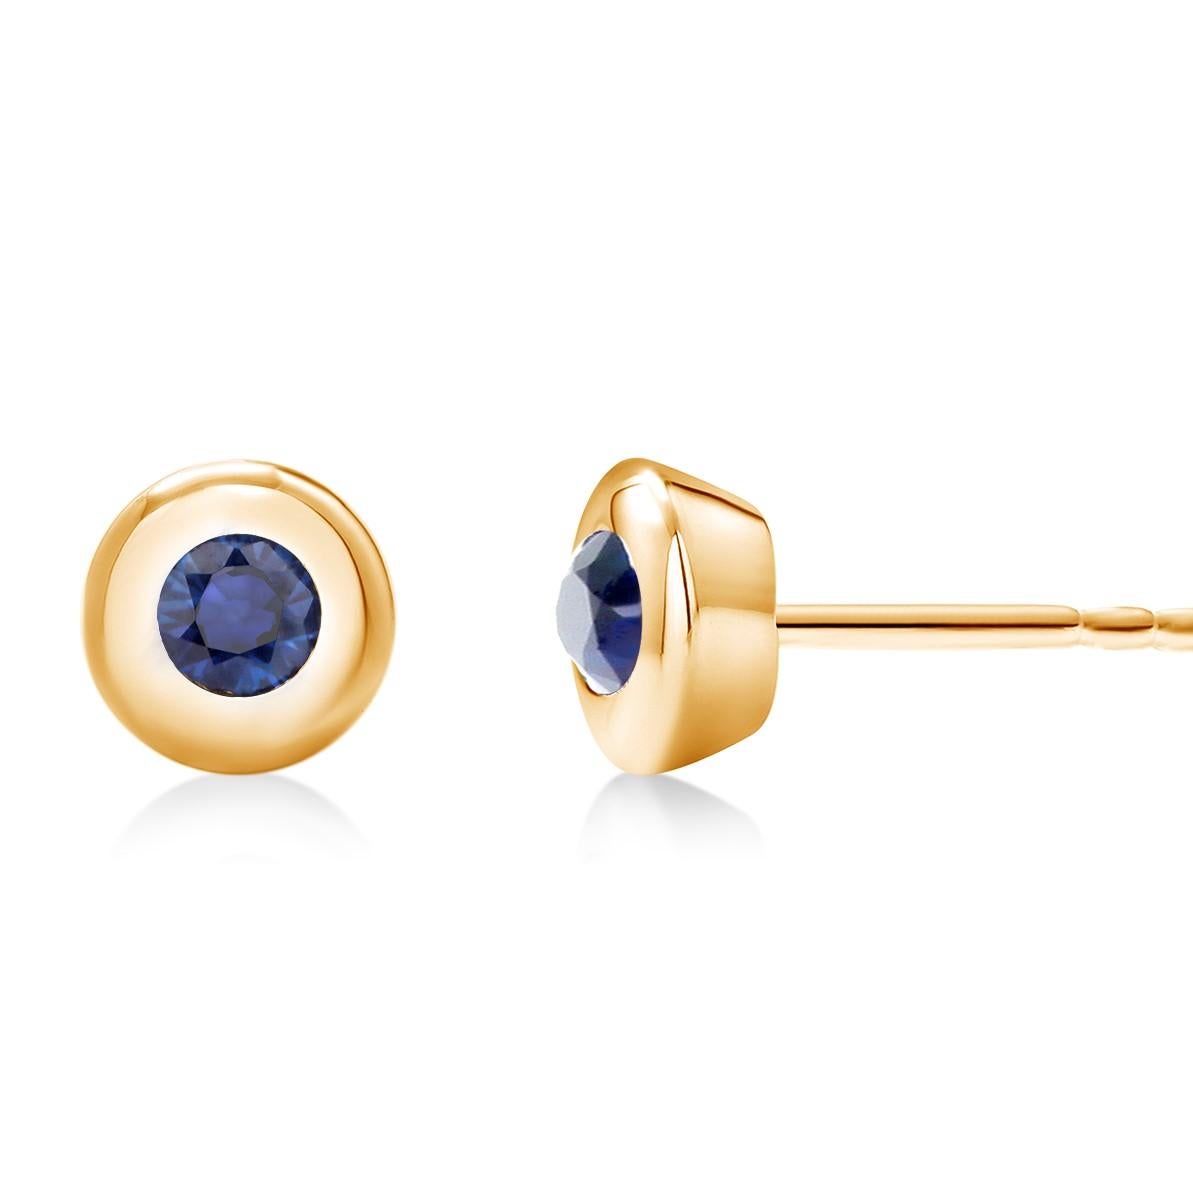 14 karat yellow gold round sapphire stud earrings
Two round sapphires measuring 3 millimeters each 
Sapphire hue tone color is cornflower blue
Sapphires weighing 0.30   
New Earrings
New Earrings
Handmade in the USA
The 14 karat gold earrings are